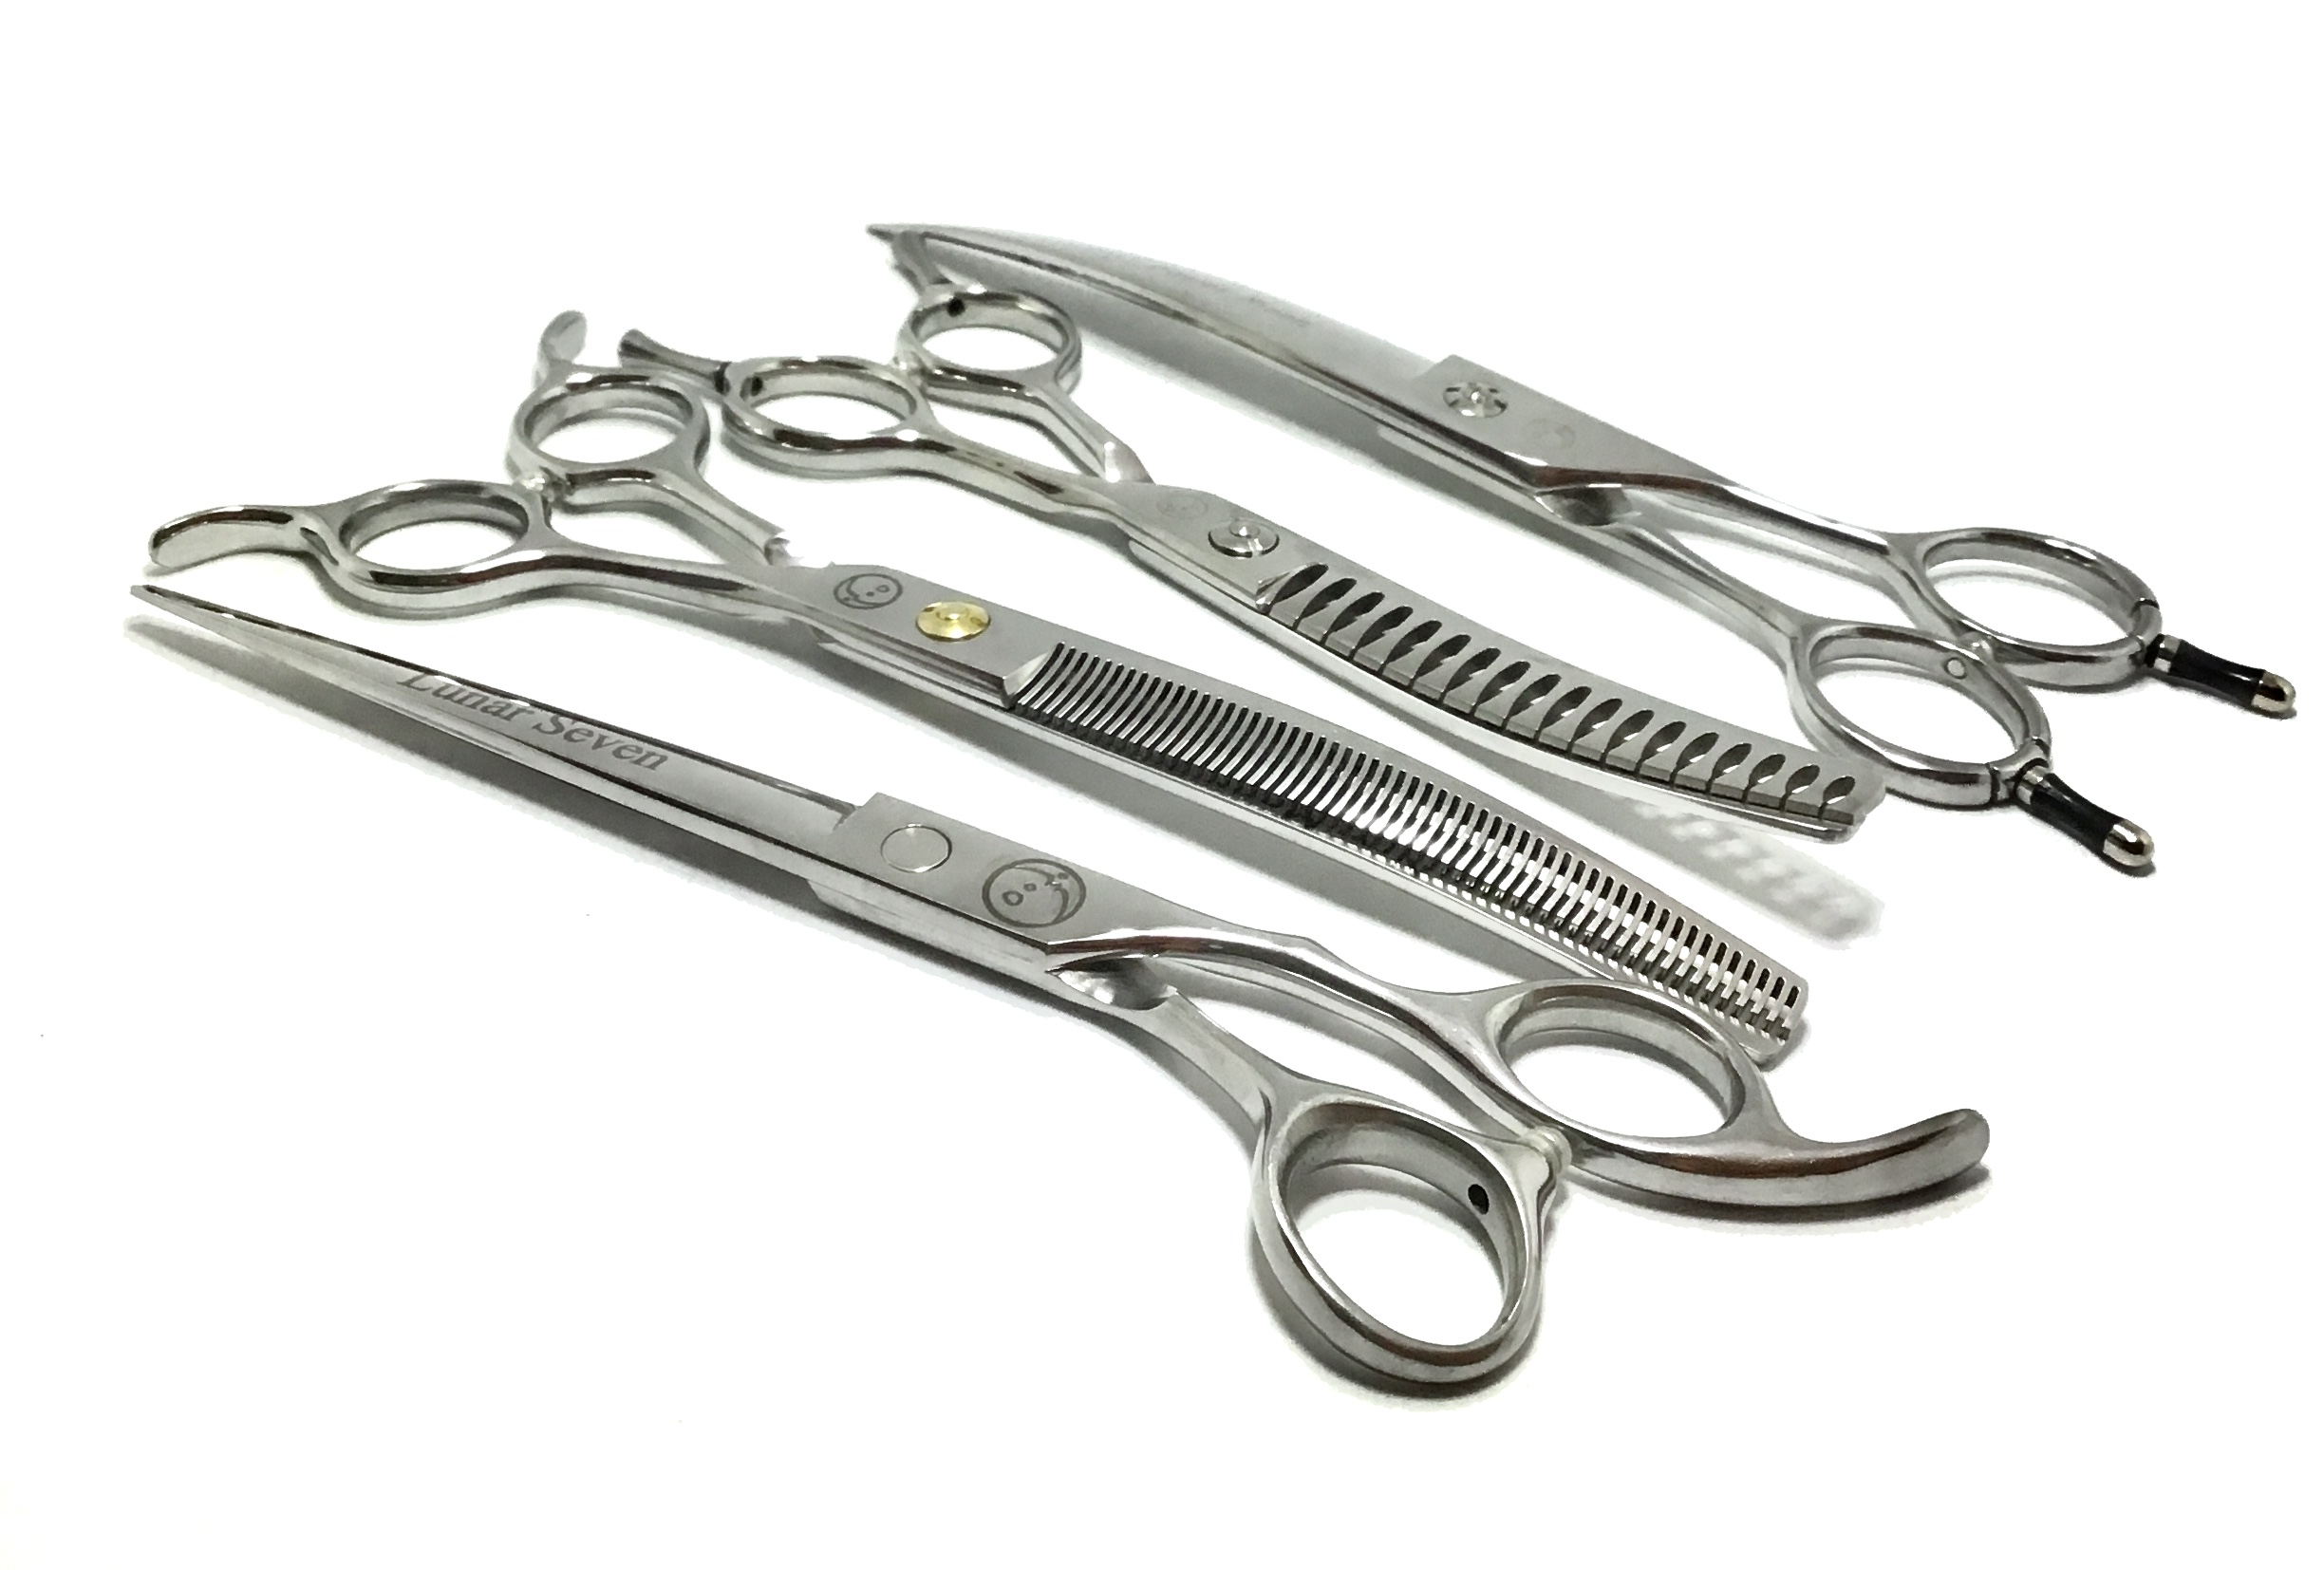 Haircut & Thinning Scissors Set HAIR KISS Made from Stainless Steel